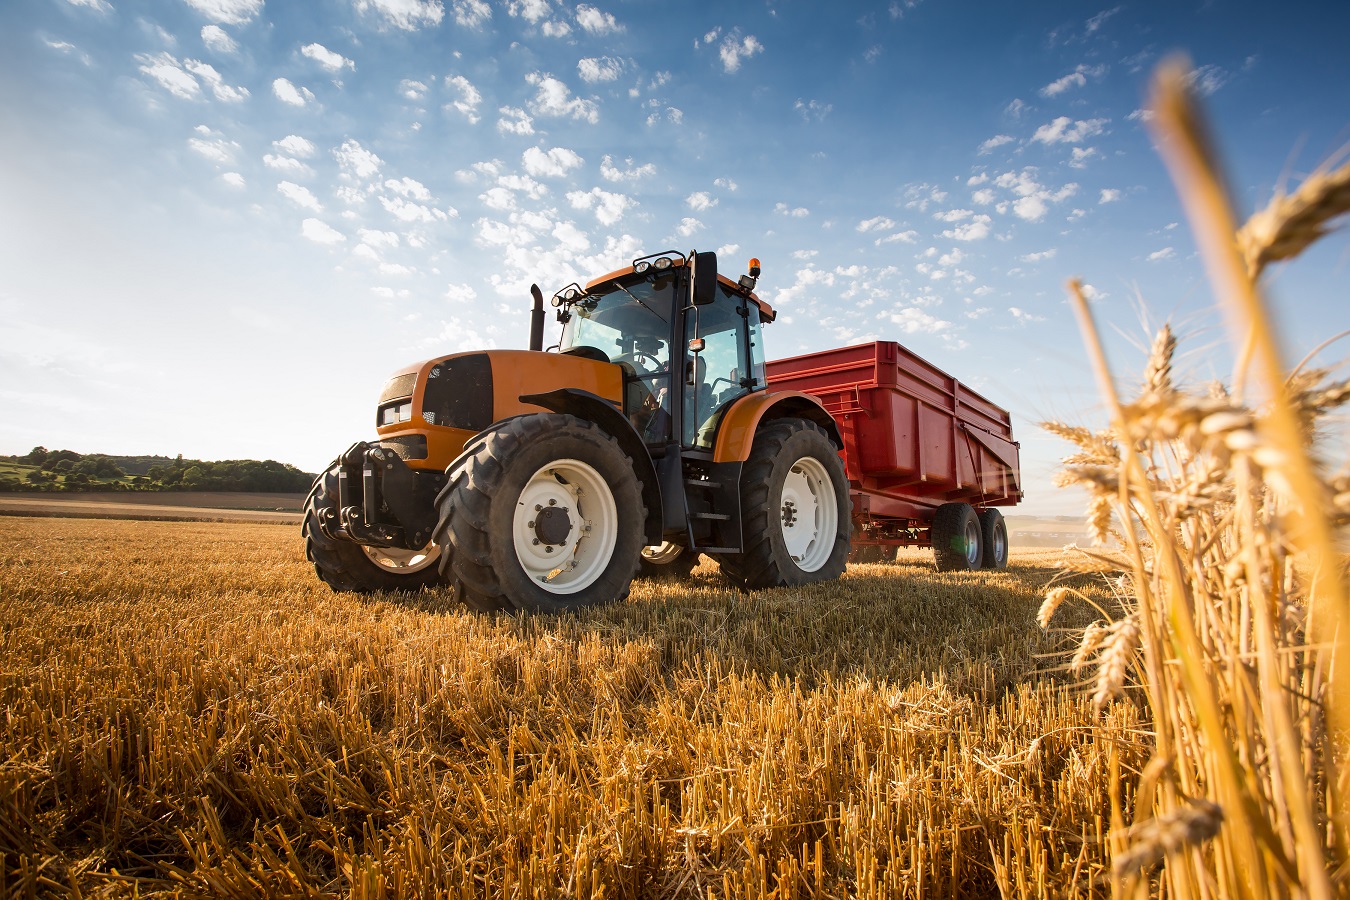 Monday 25th September - Sustainable Farming Incentive updates for Arable Farms